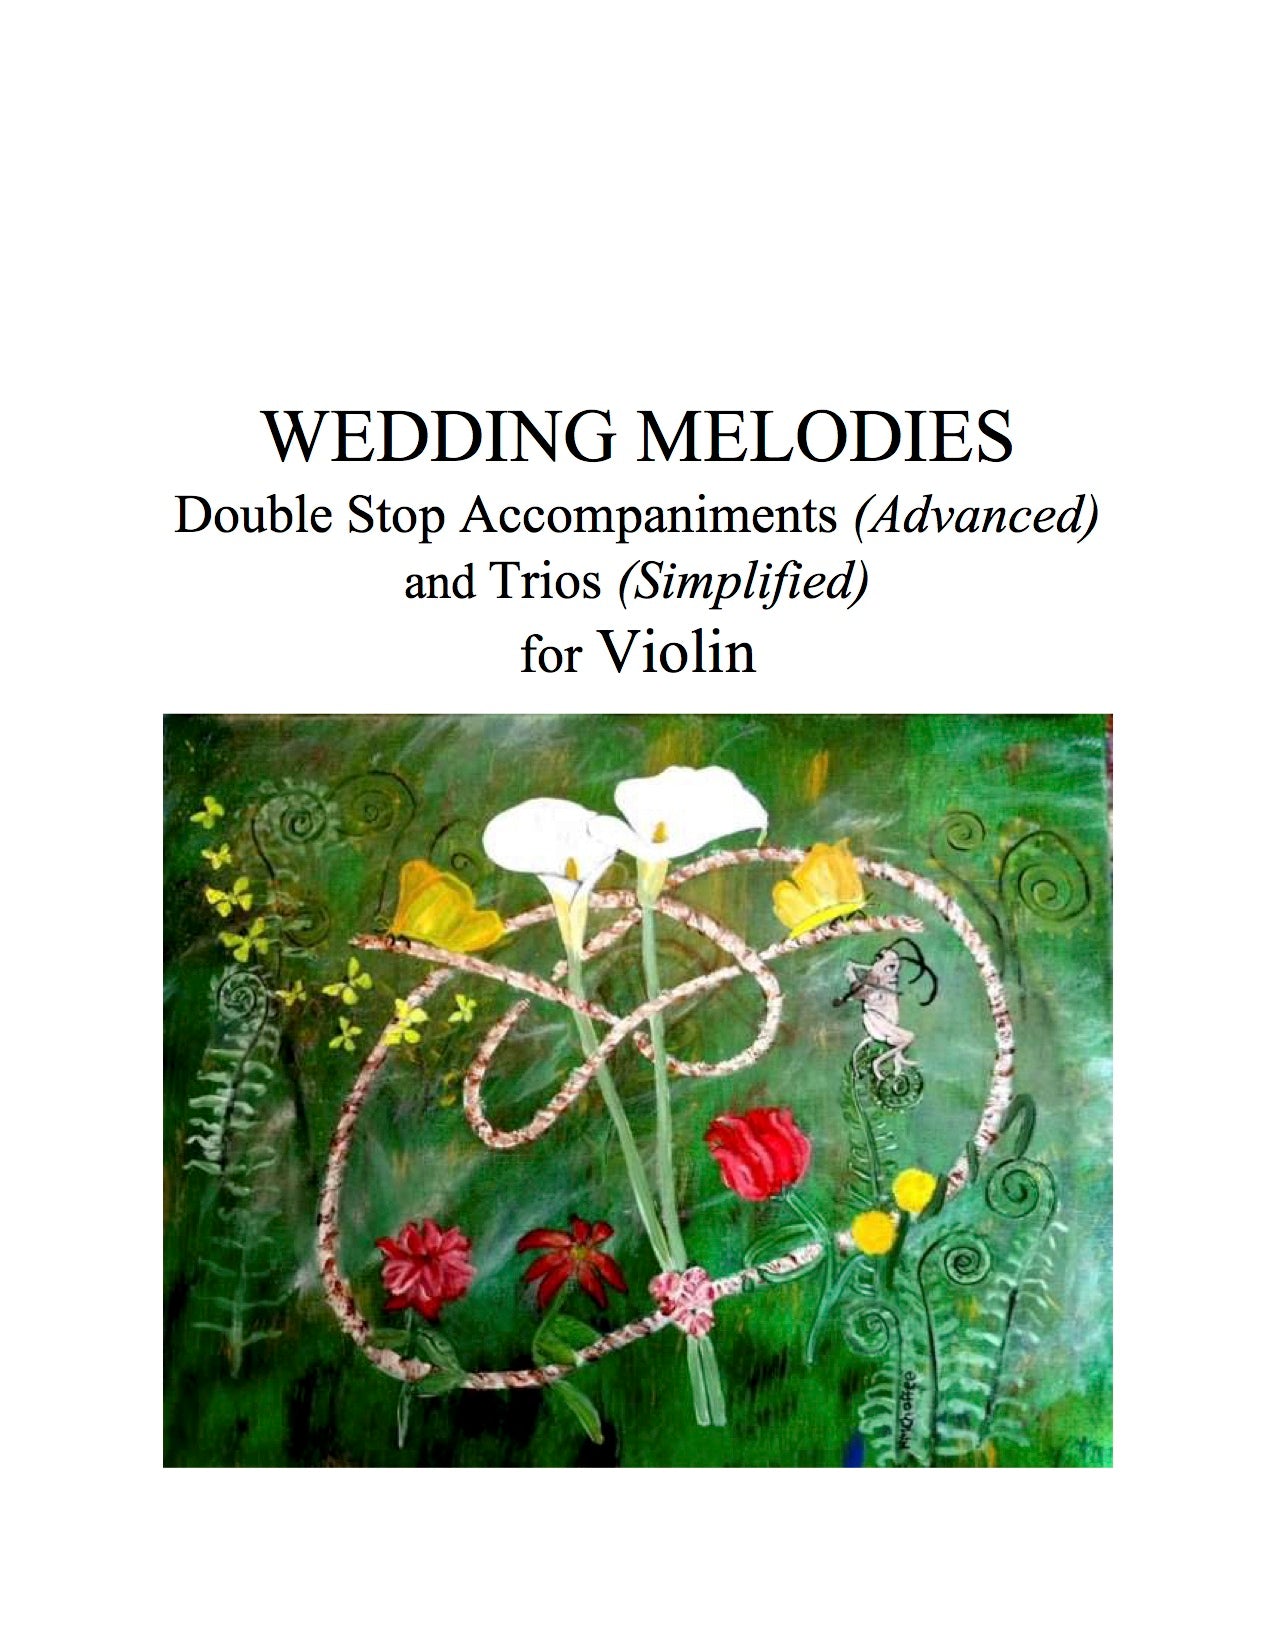 053 - Wedding Melodies: Double Stop Accompaniments and Trios For Violin